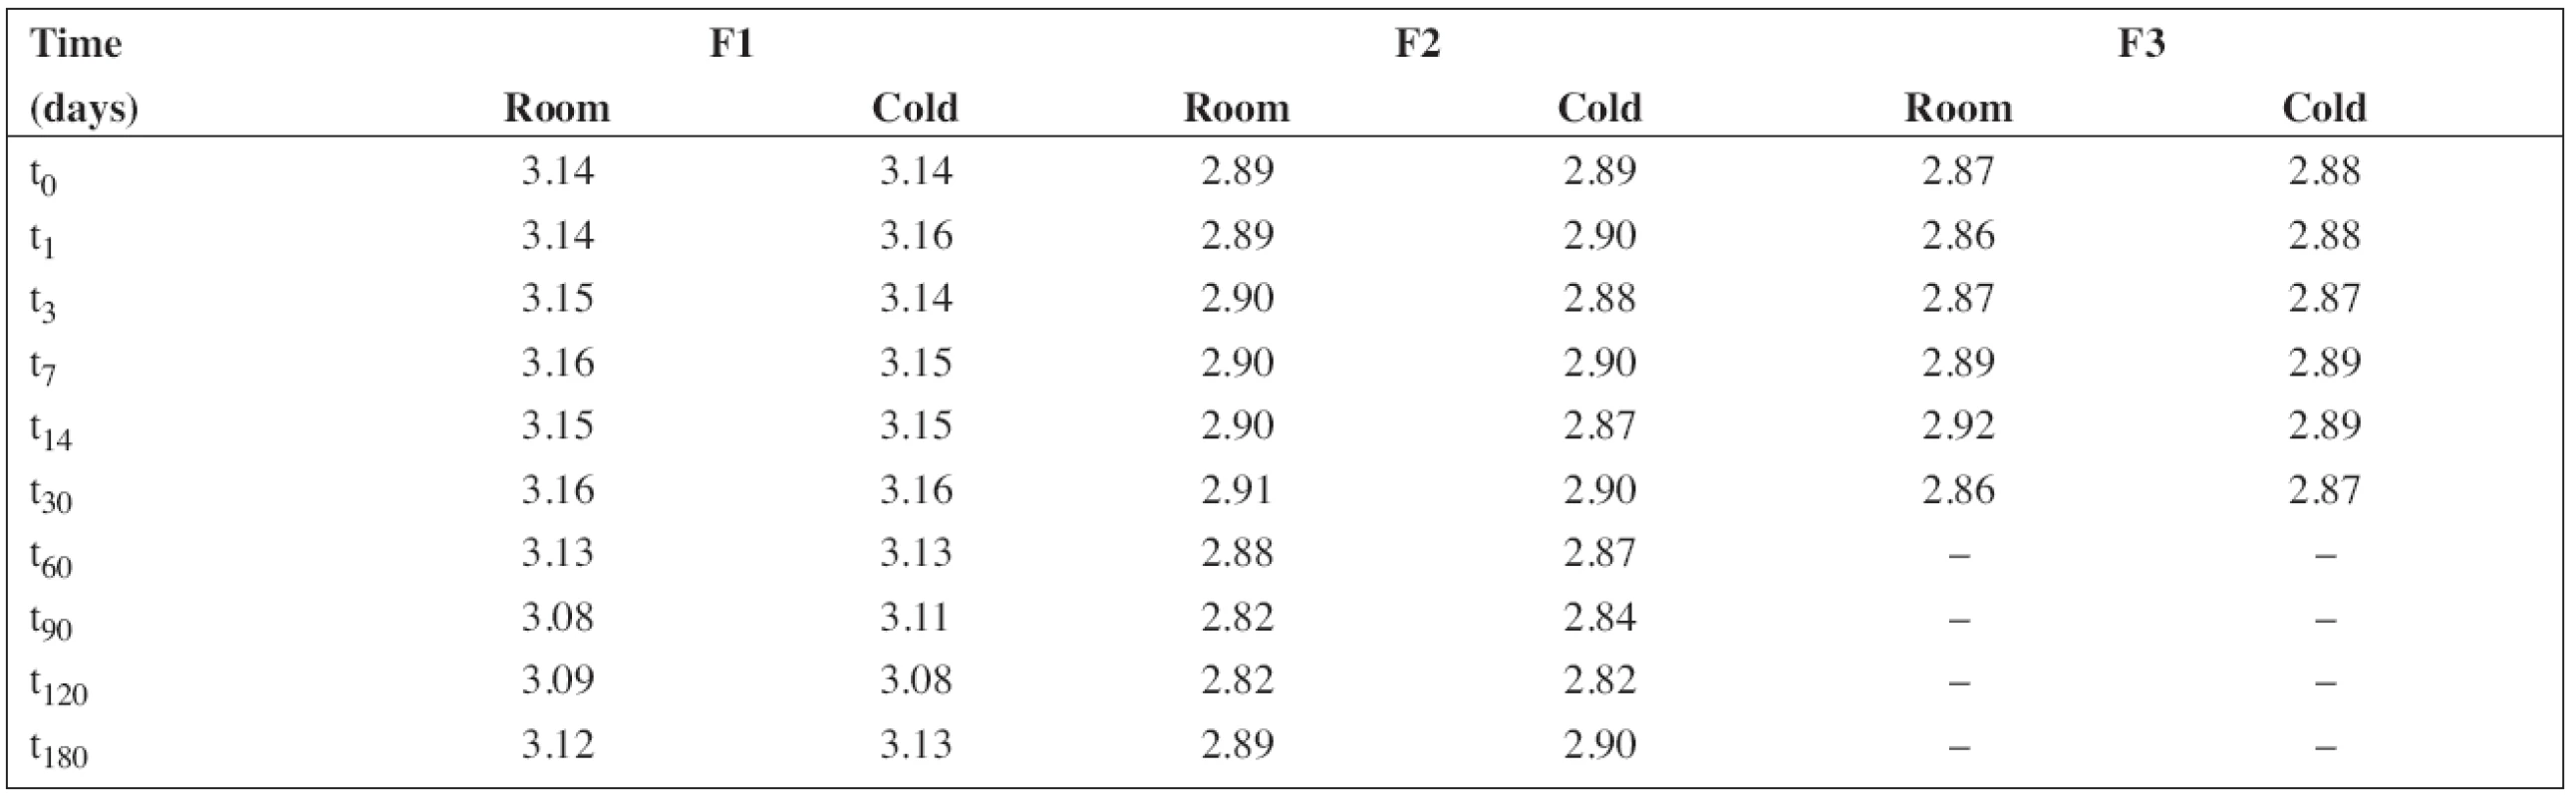 The results of pH measurement during the stability study at room temperature (room) and/or in a refrigerator (cold)